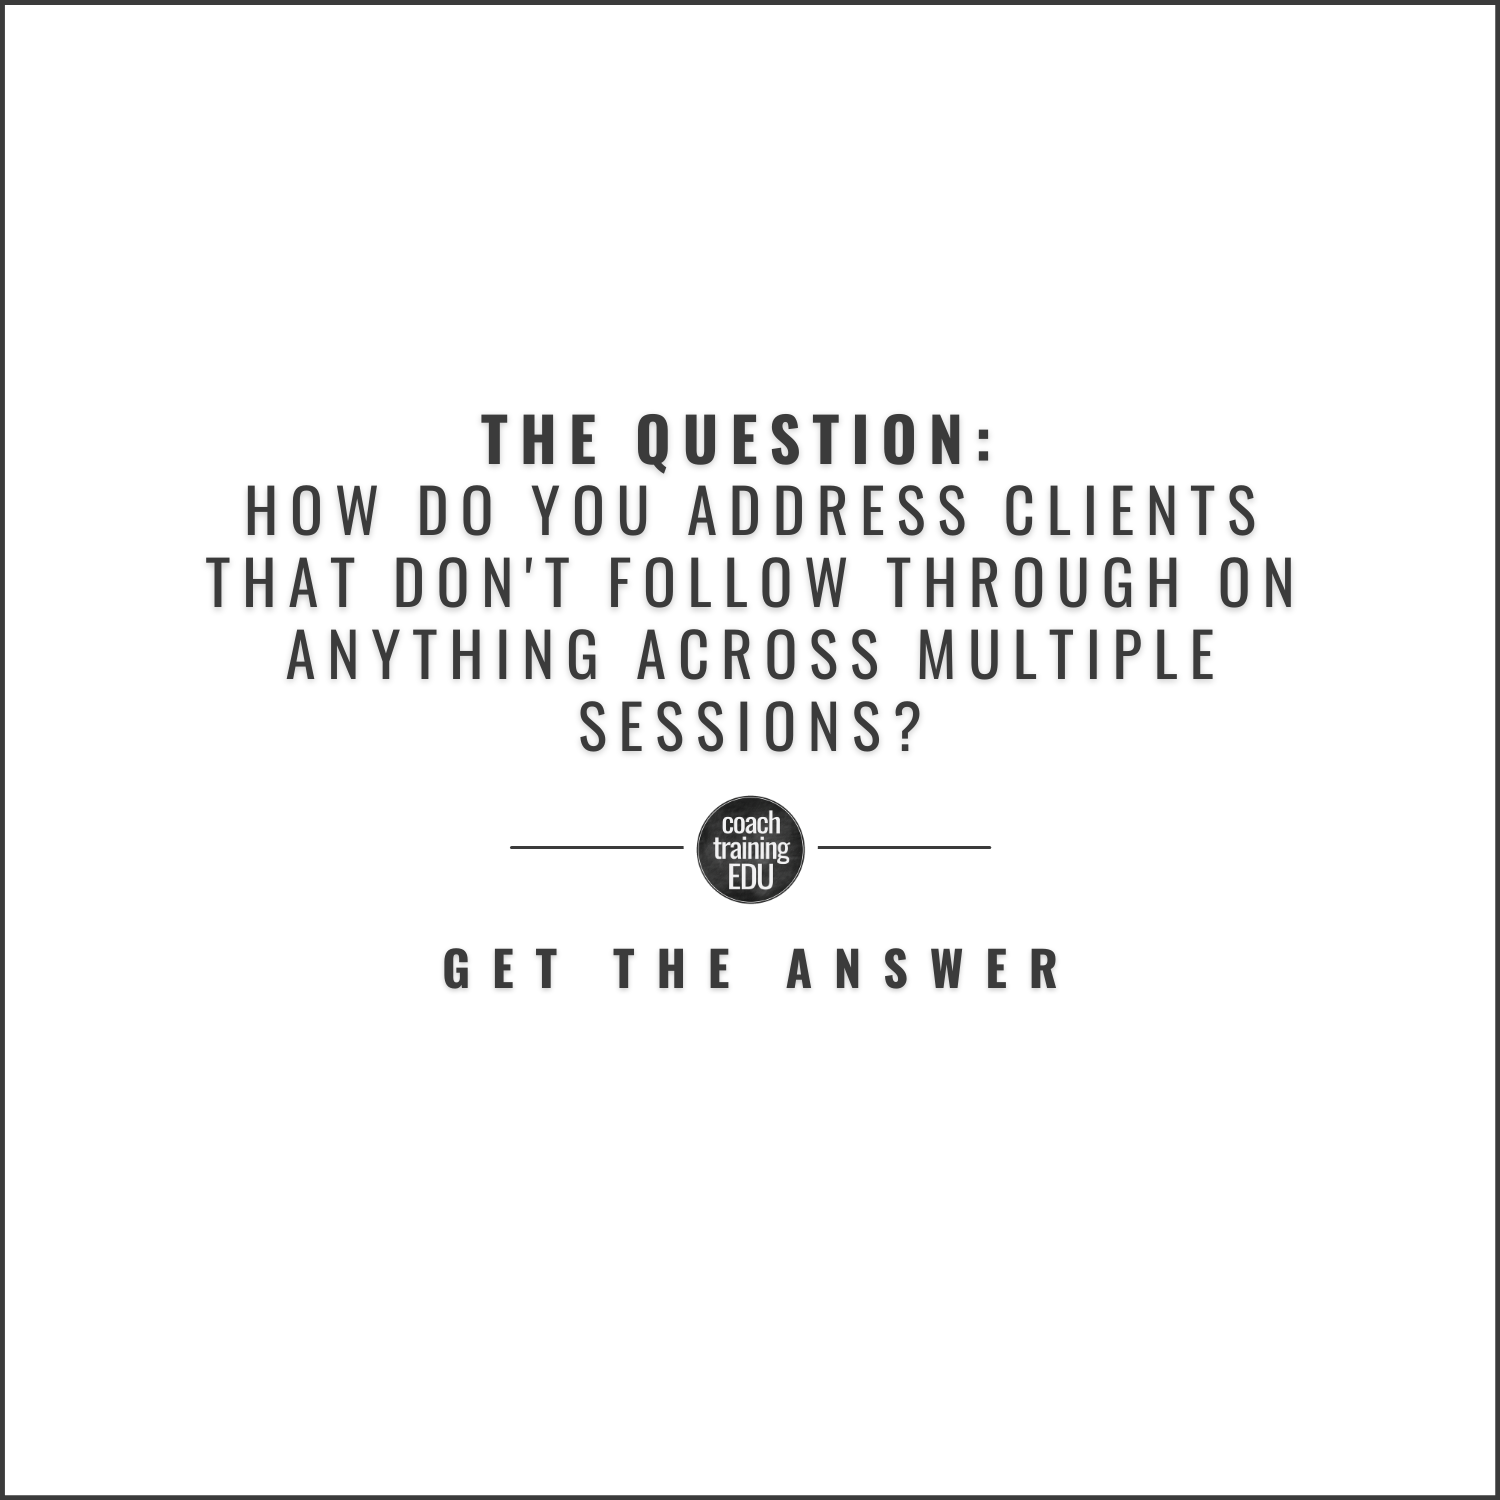 How do you address clients that don't follow through on anything across multiple sessions?